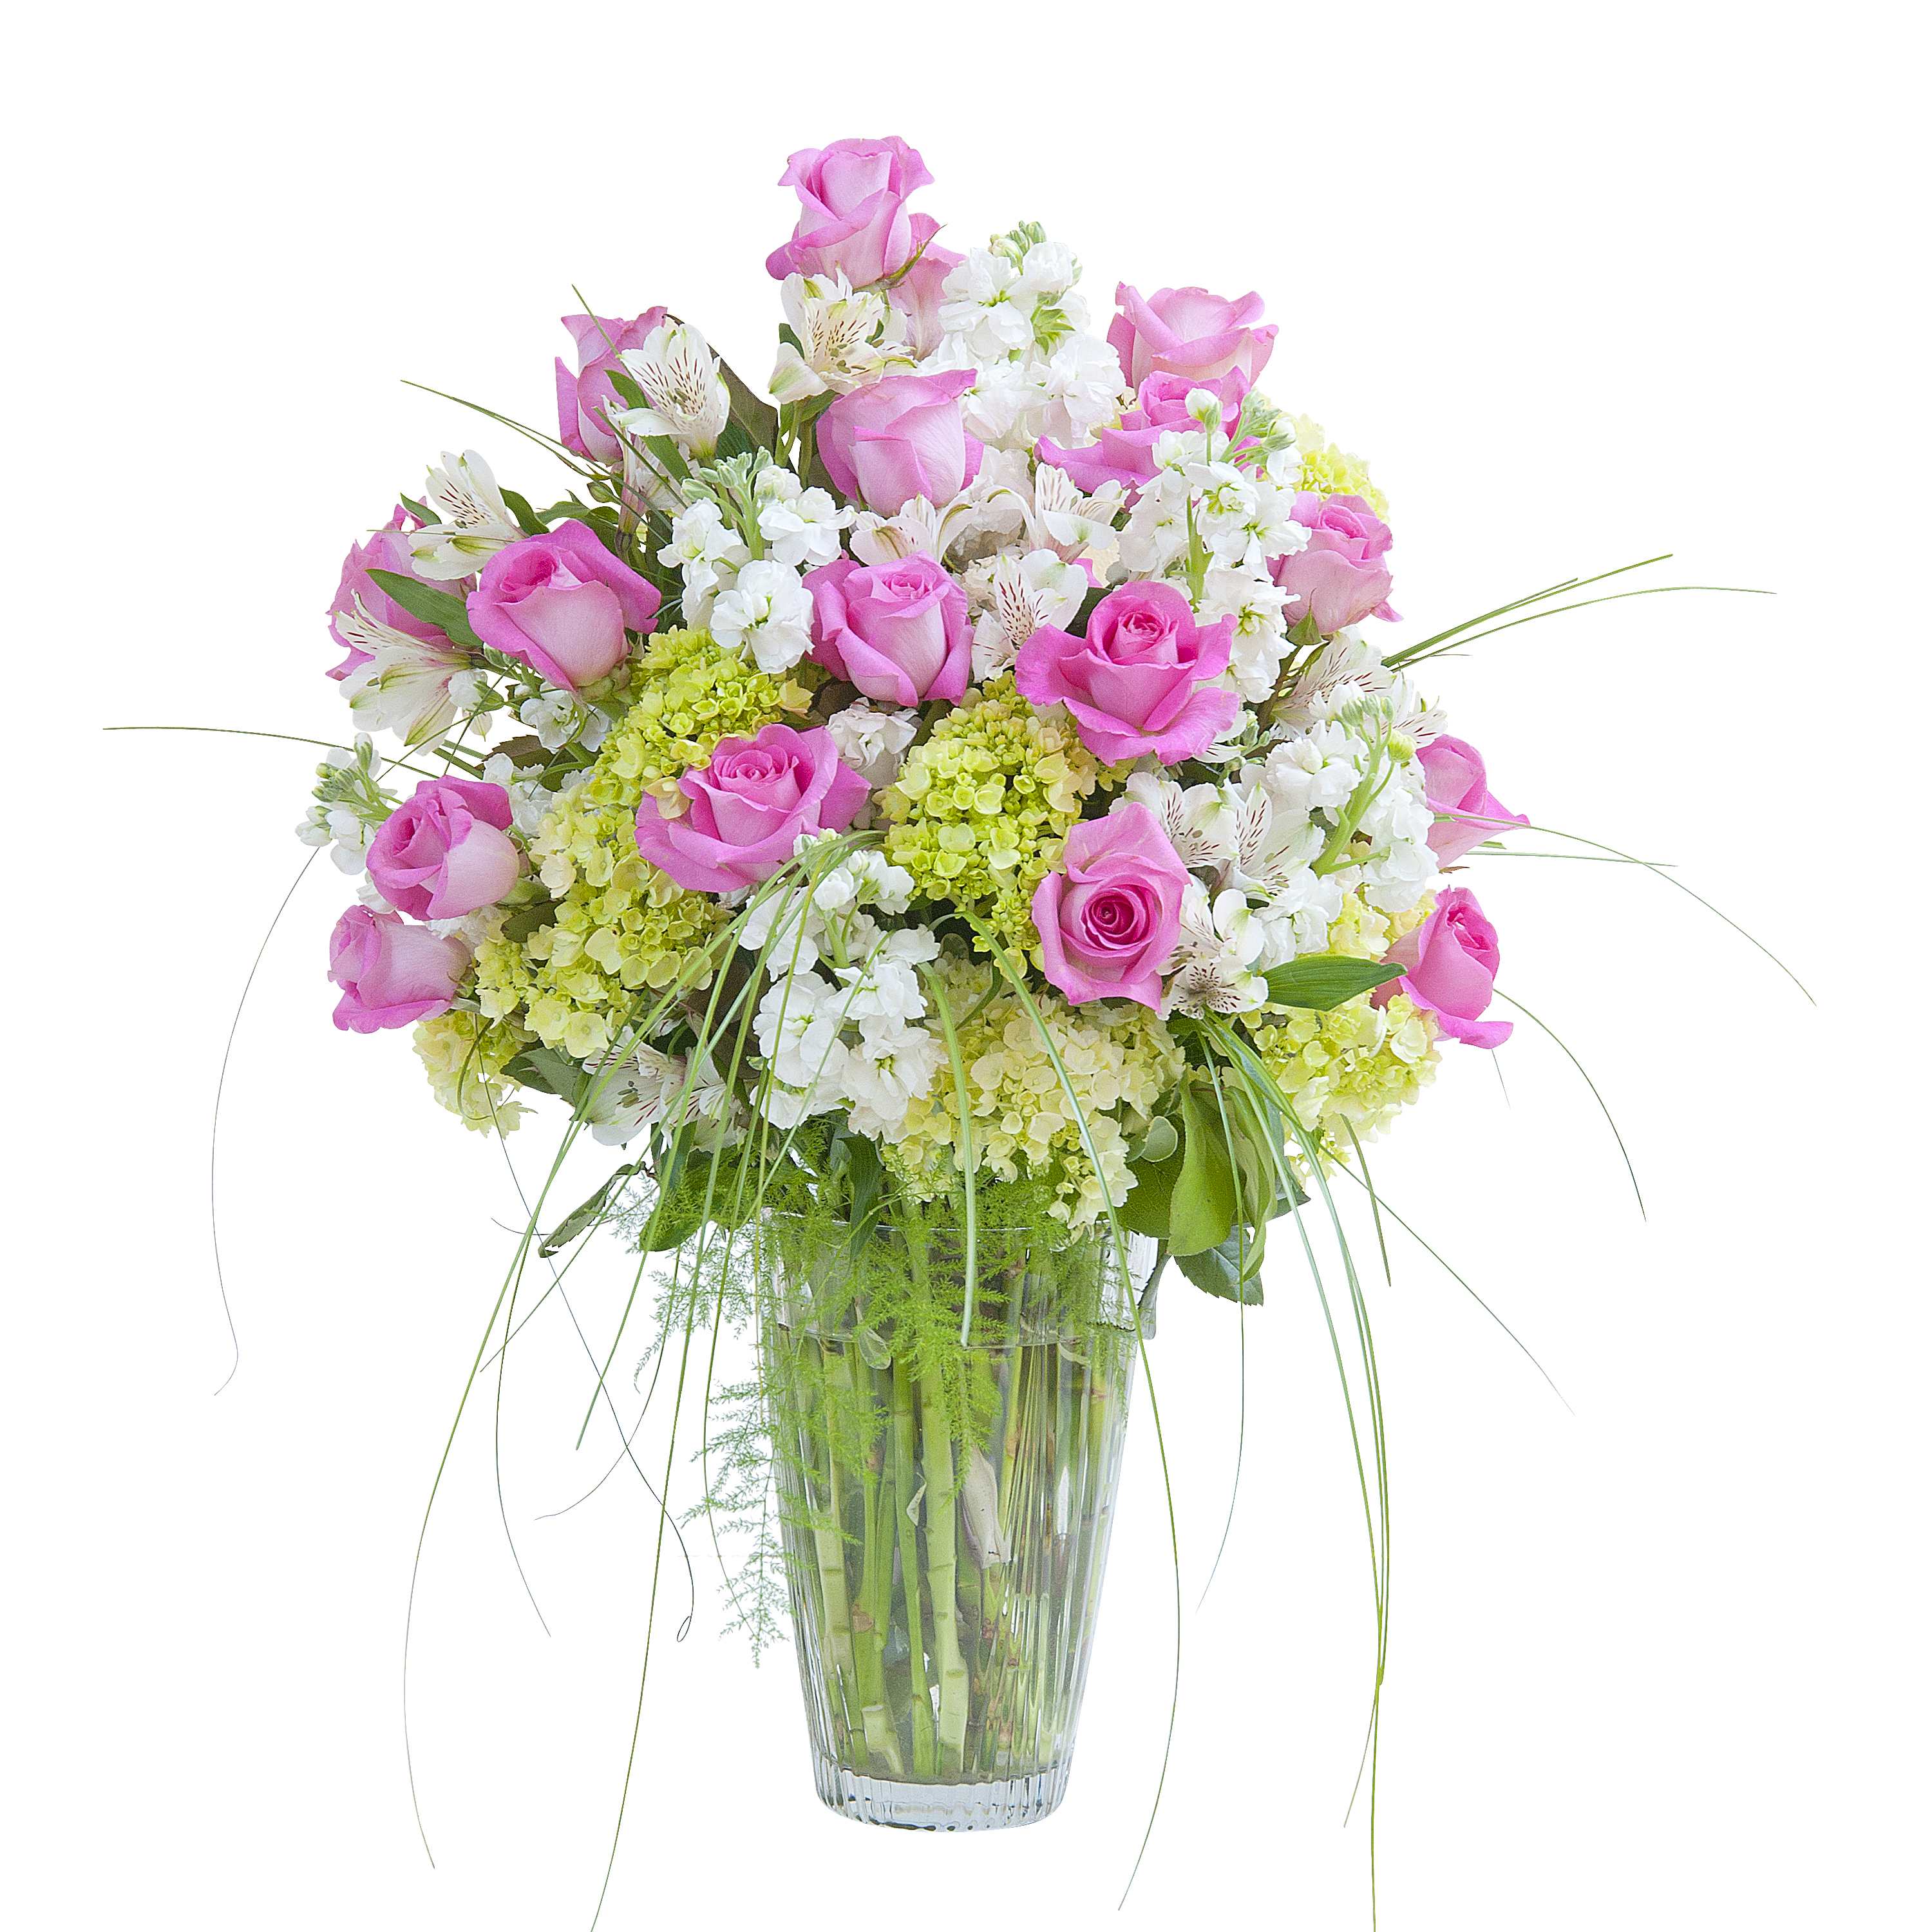 Pink and White Elegance Vase - Pink Roses, white Alstroemeria and stock, accented with soft green Hydrangea, and premium foliage.